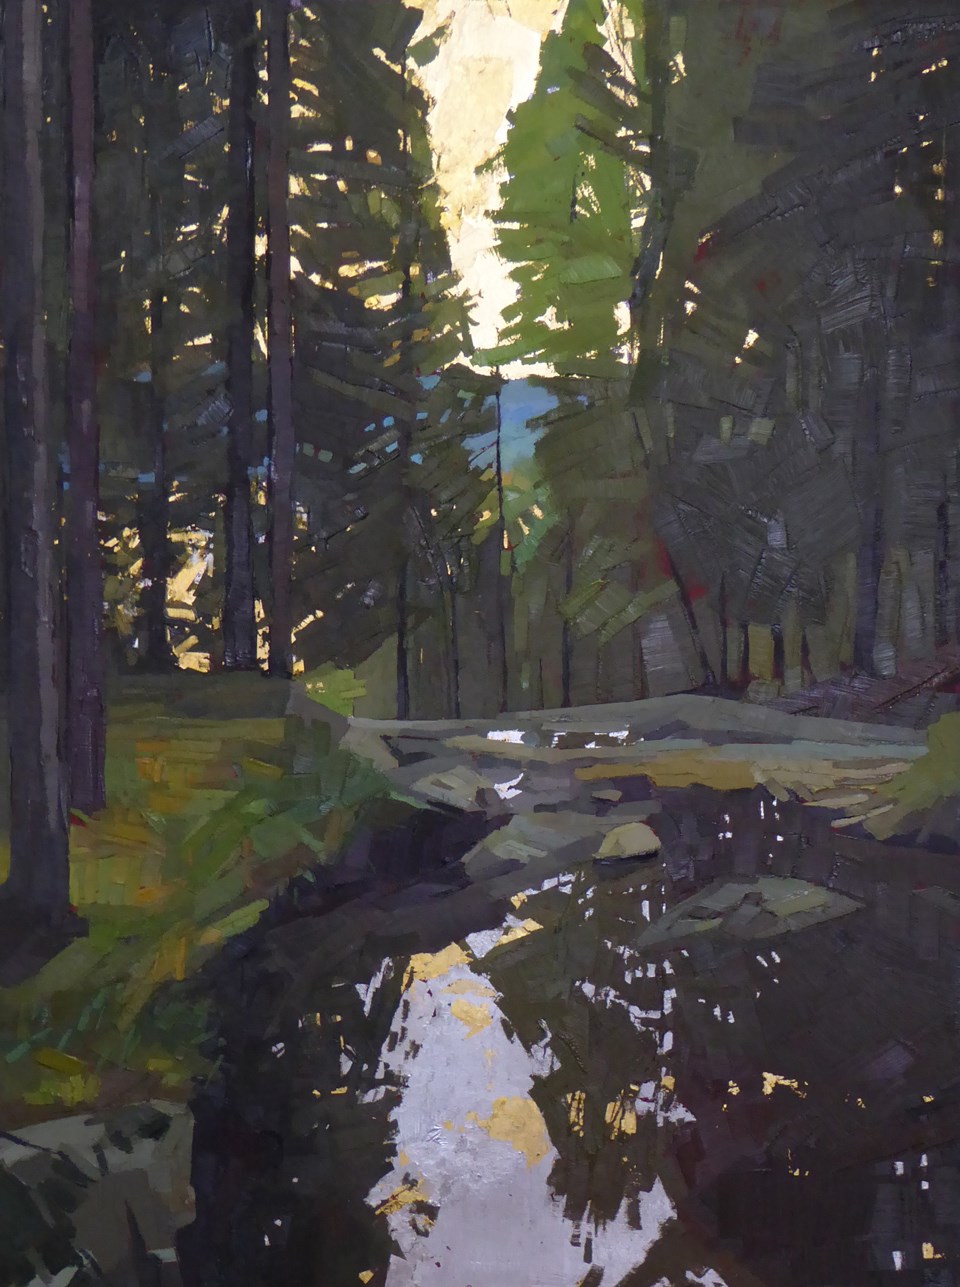 Painting of a creek with reflection of trees and falling light